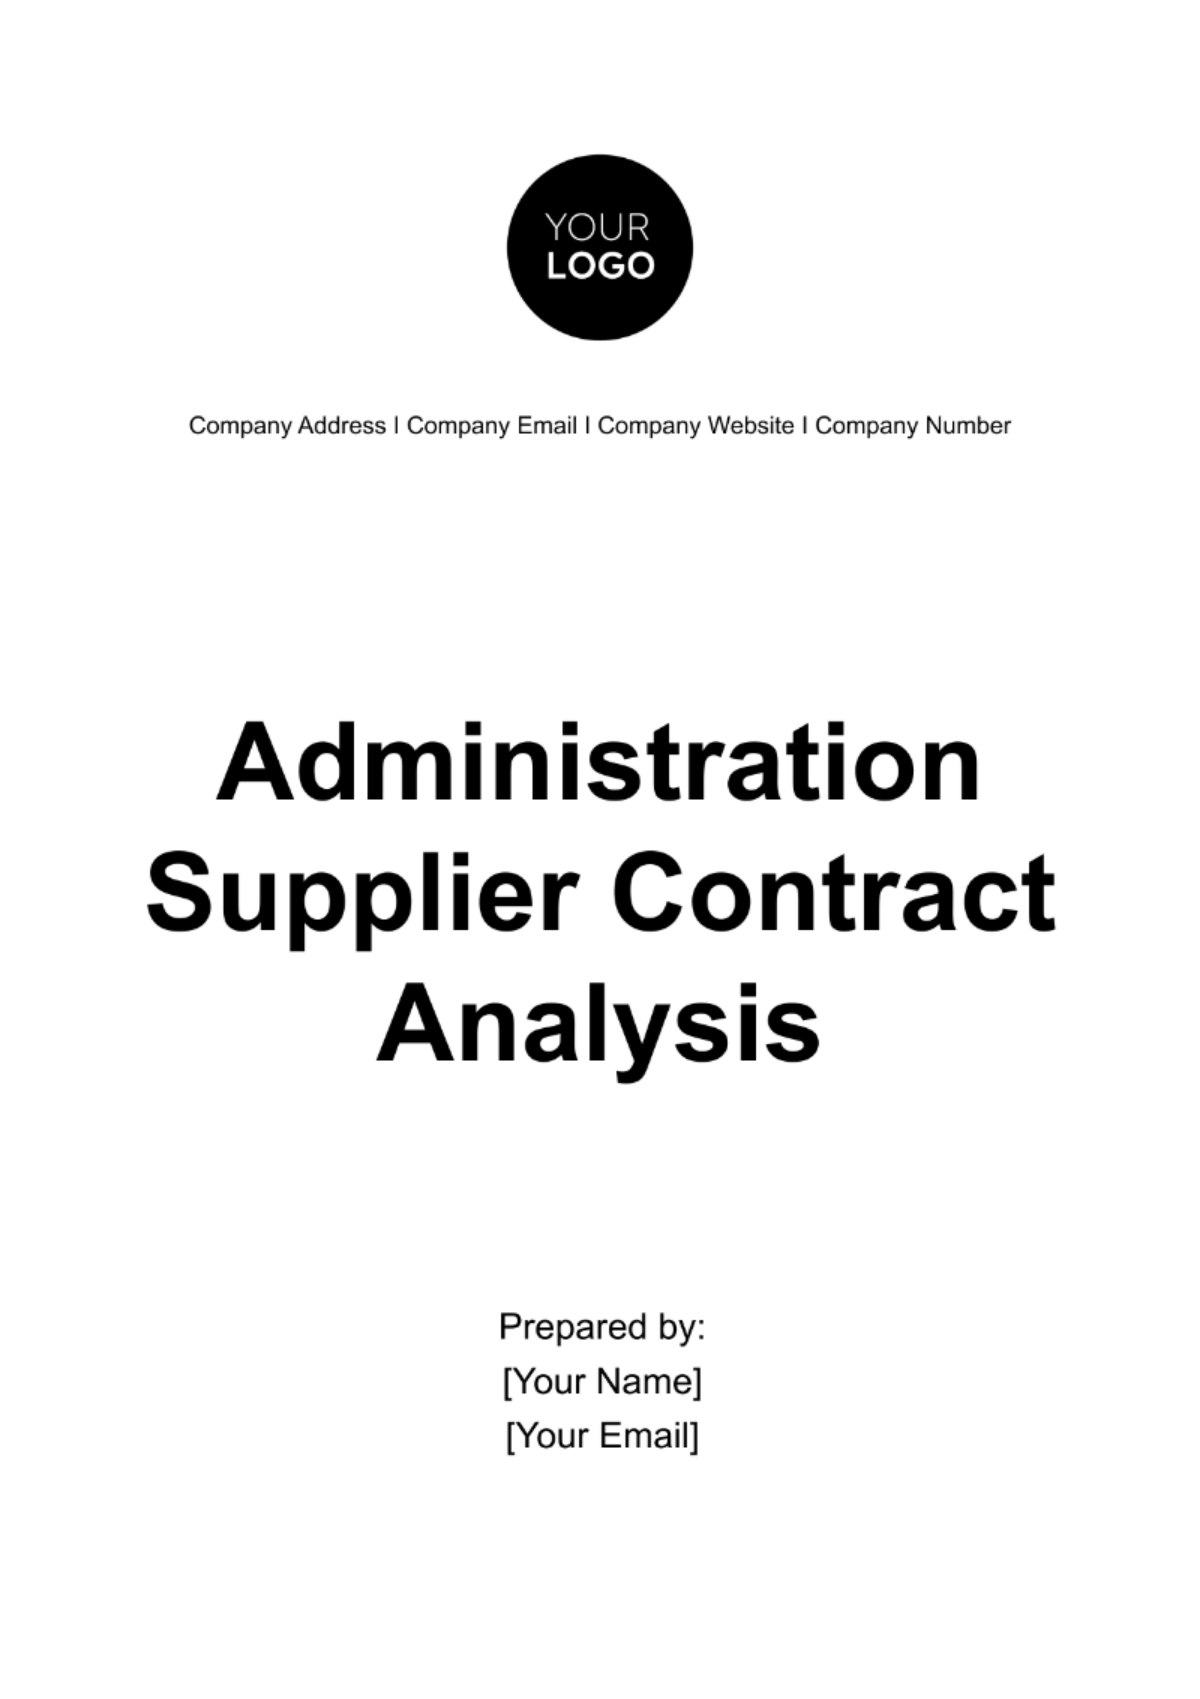 Free Administration Supplier Contract Analysis Template